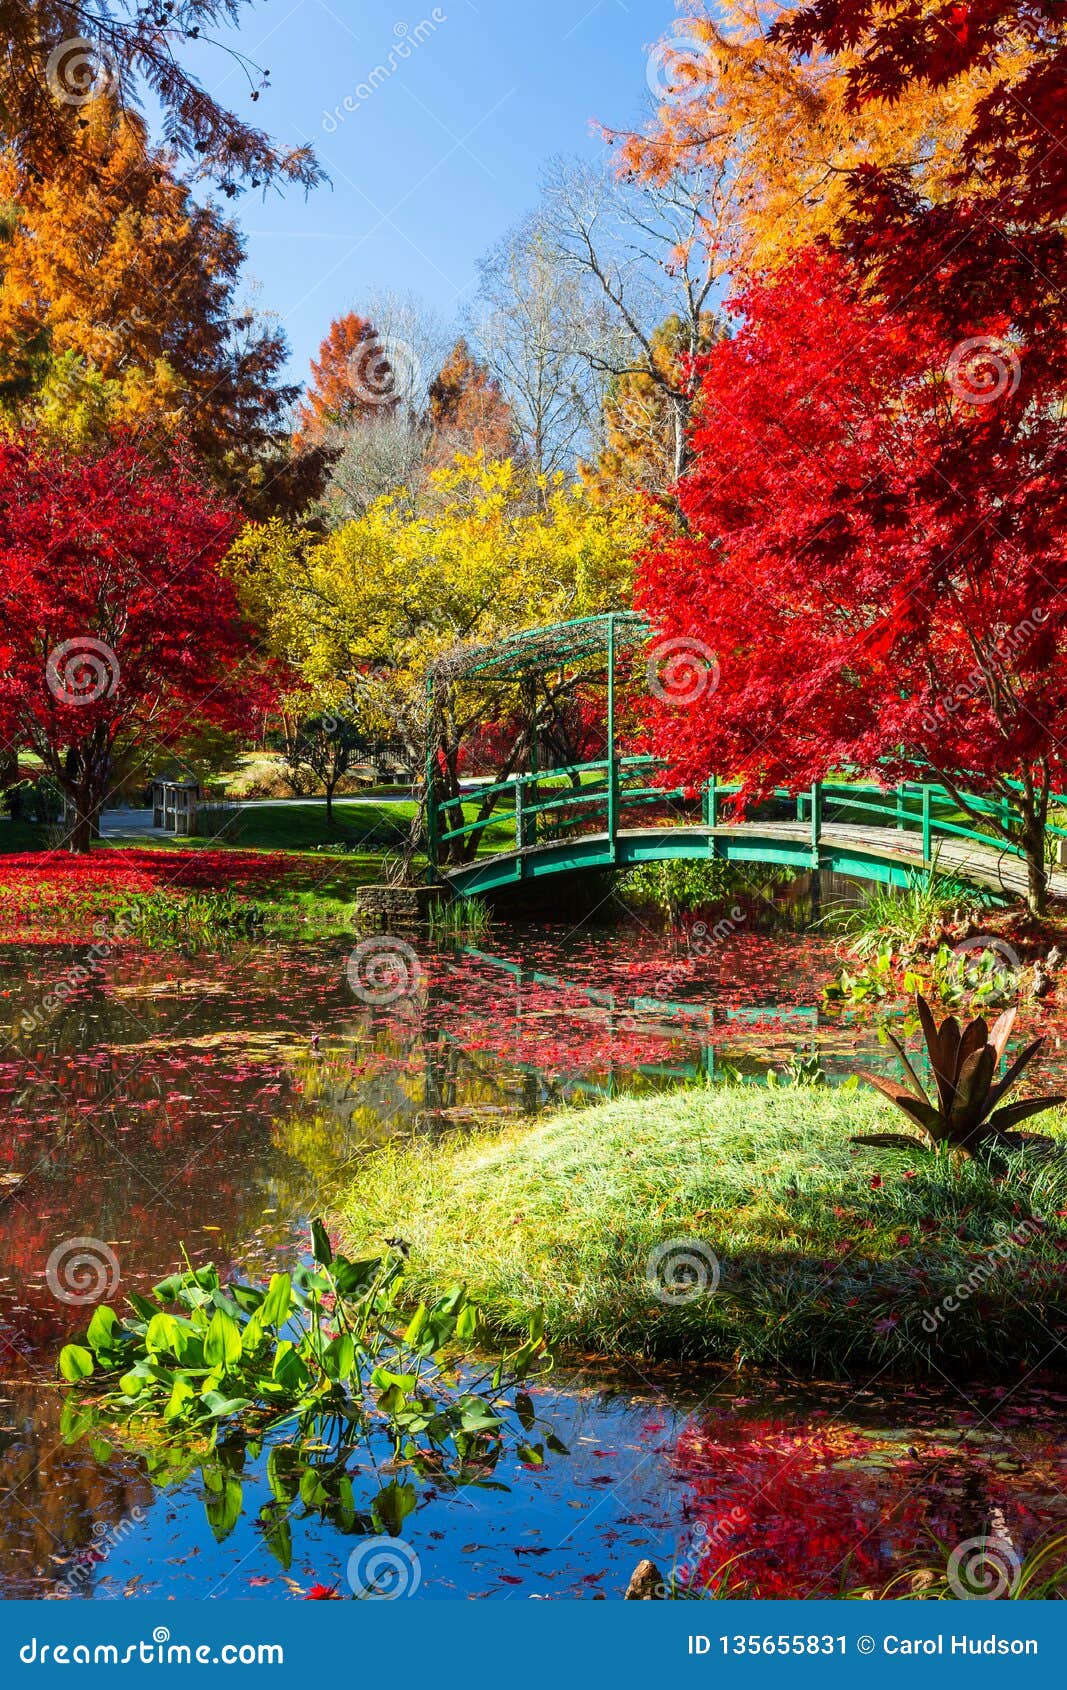 Vibrant Red, Yellow and Orange Foliage at Gibbs Gardens in Georgia in ...